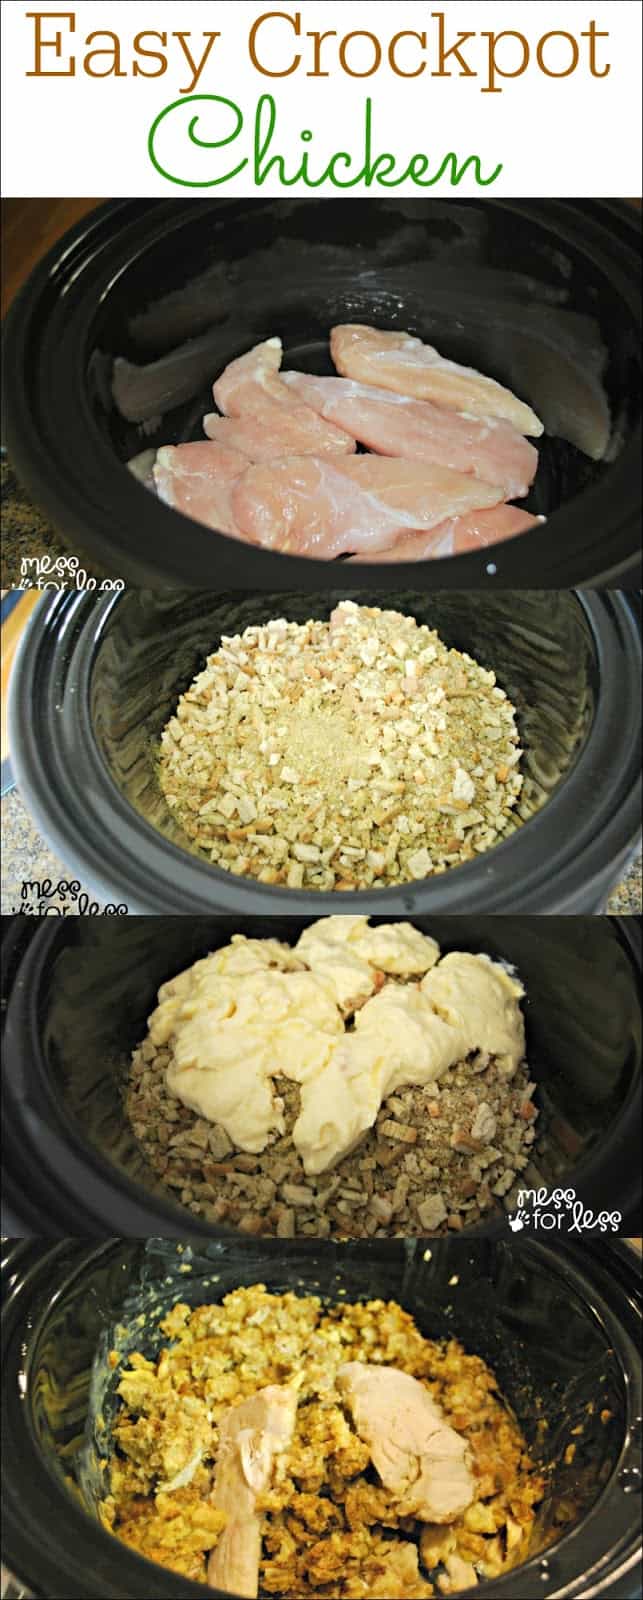 Easy Crockpot Chicken - Just a few ingredients to make this simple slow cooker dinner sure to become a family favorite!